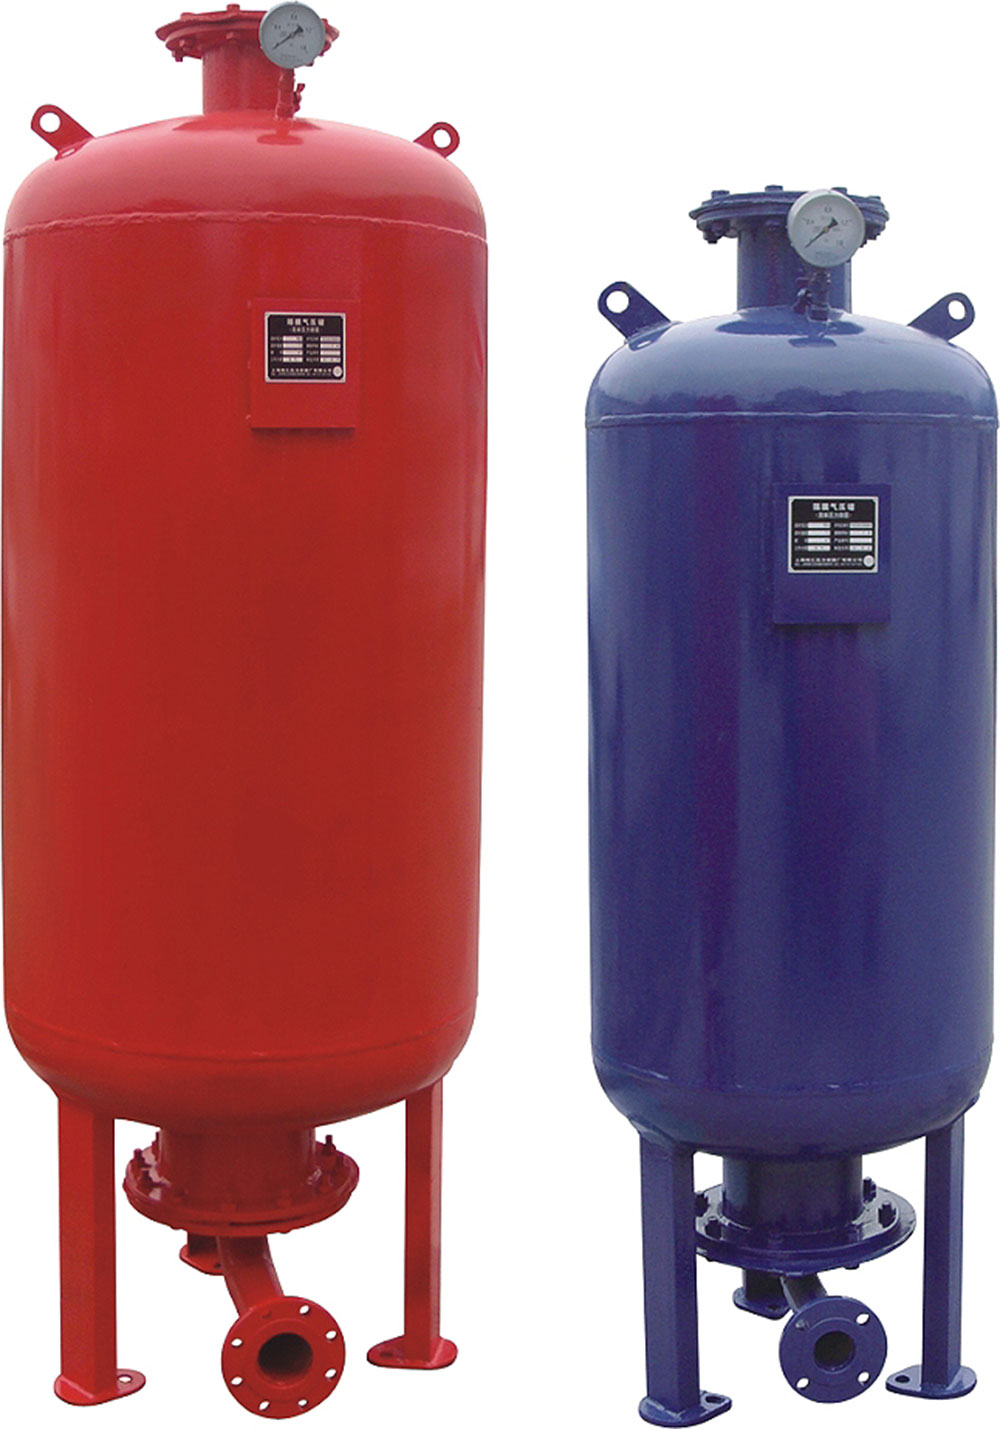 pressure tank 1 1 - Do you know two types of pressure tanks - Better Technology CO., LTD.